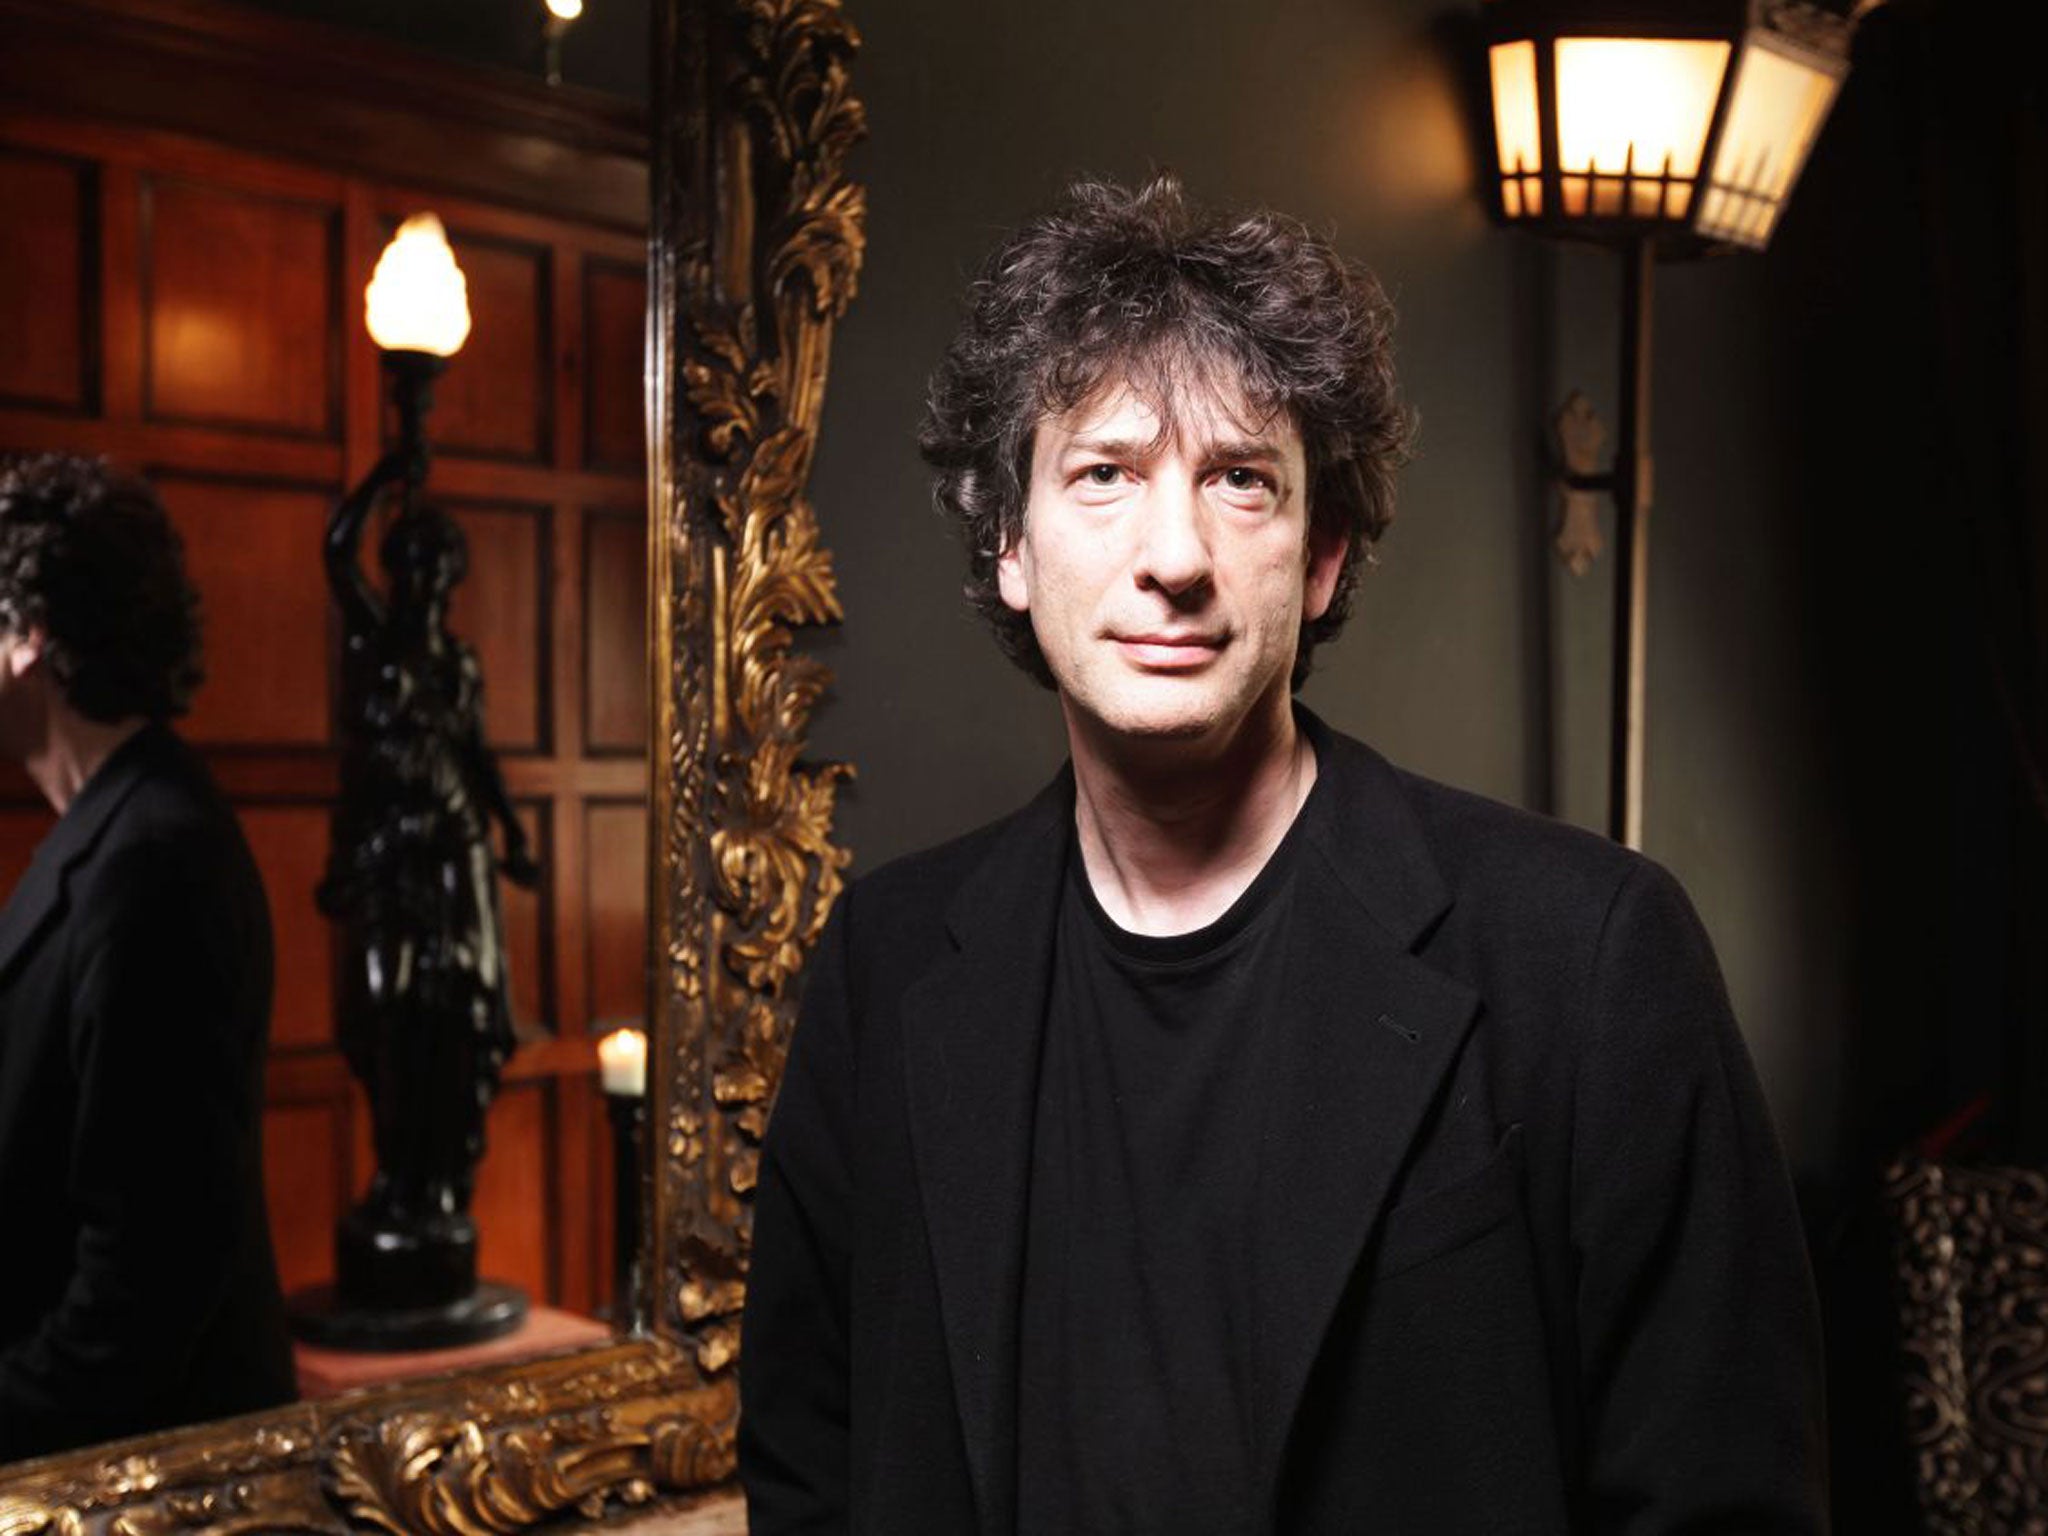 ‘I can’t see the point of being rich and miserable,’ says Neil Gaiman